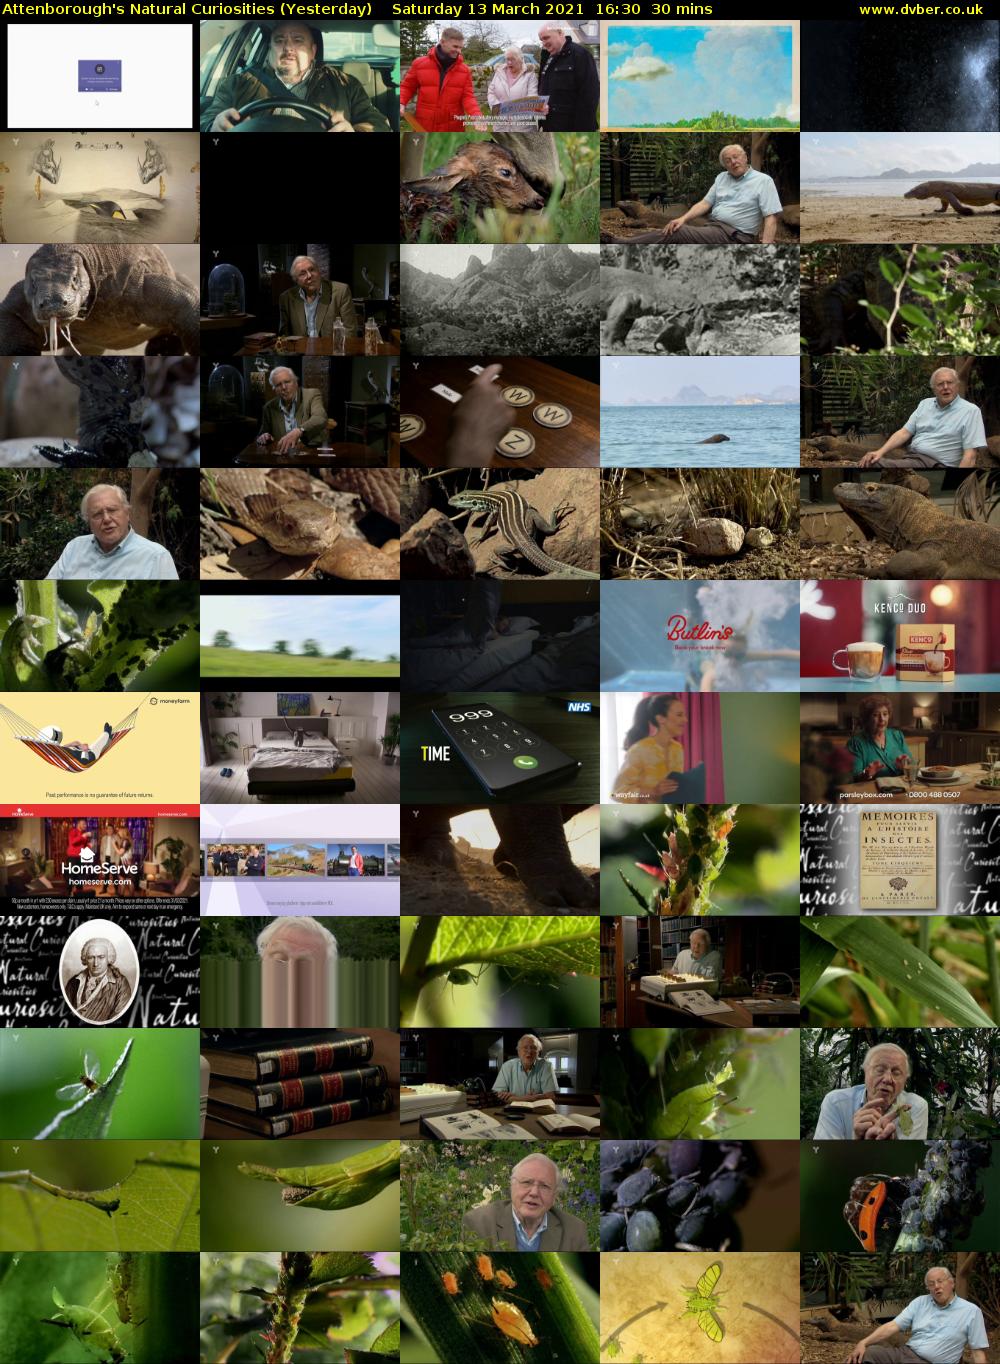 Attenborough's Natural Curiosities (Yesterday) Saturday 13 March 2021 16:30 - 17:00